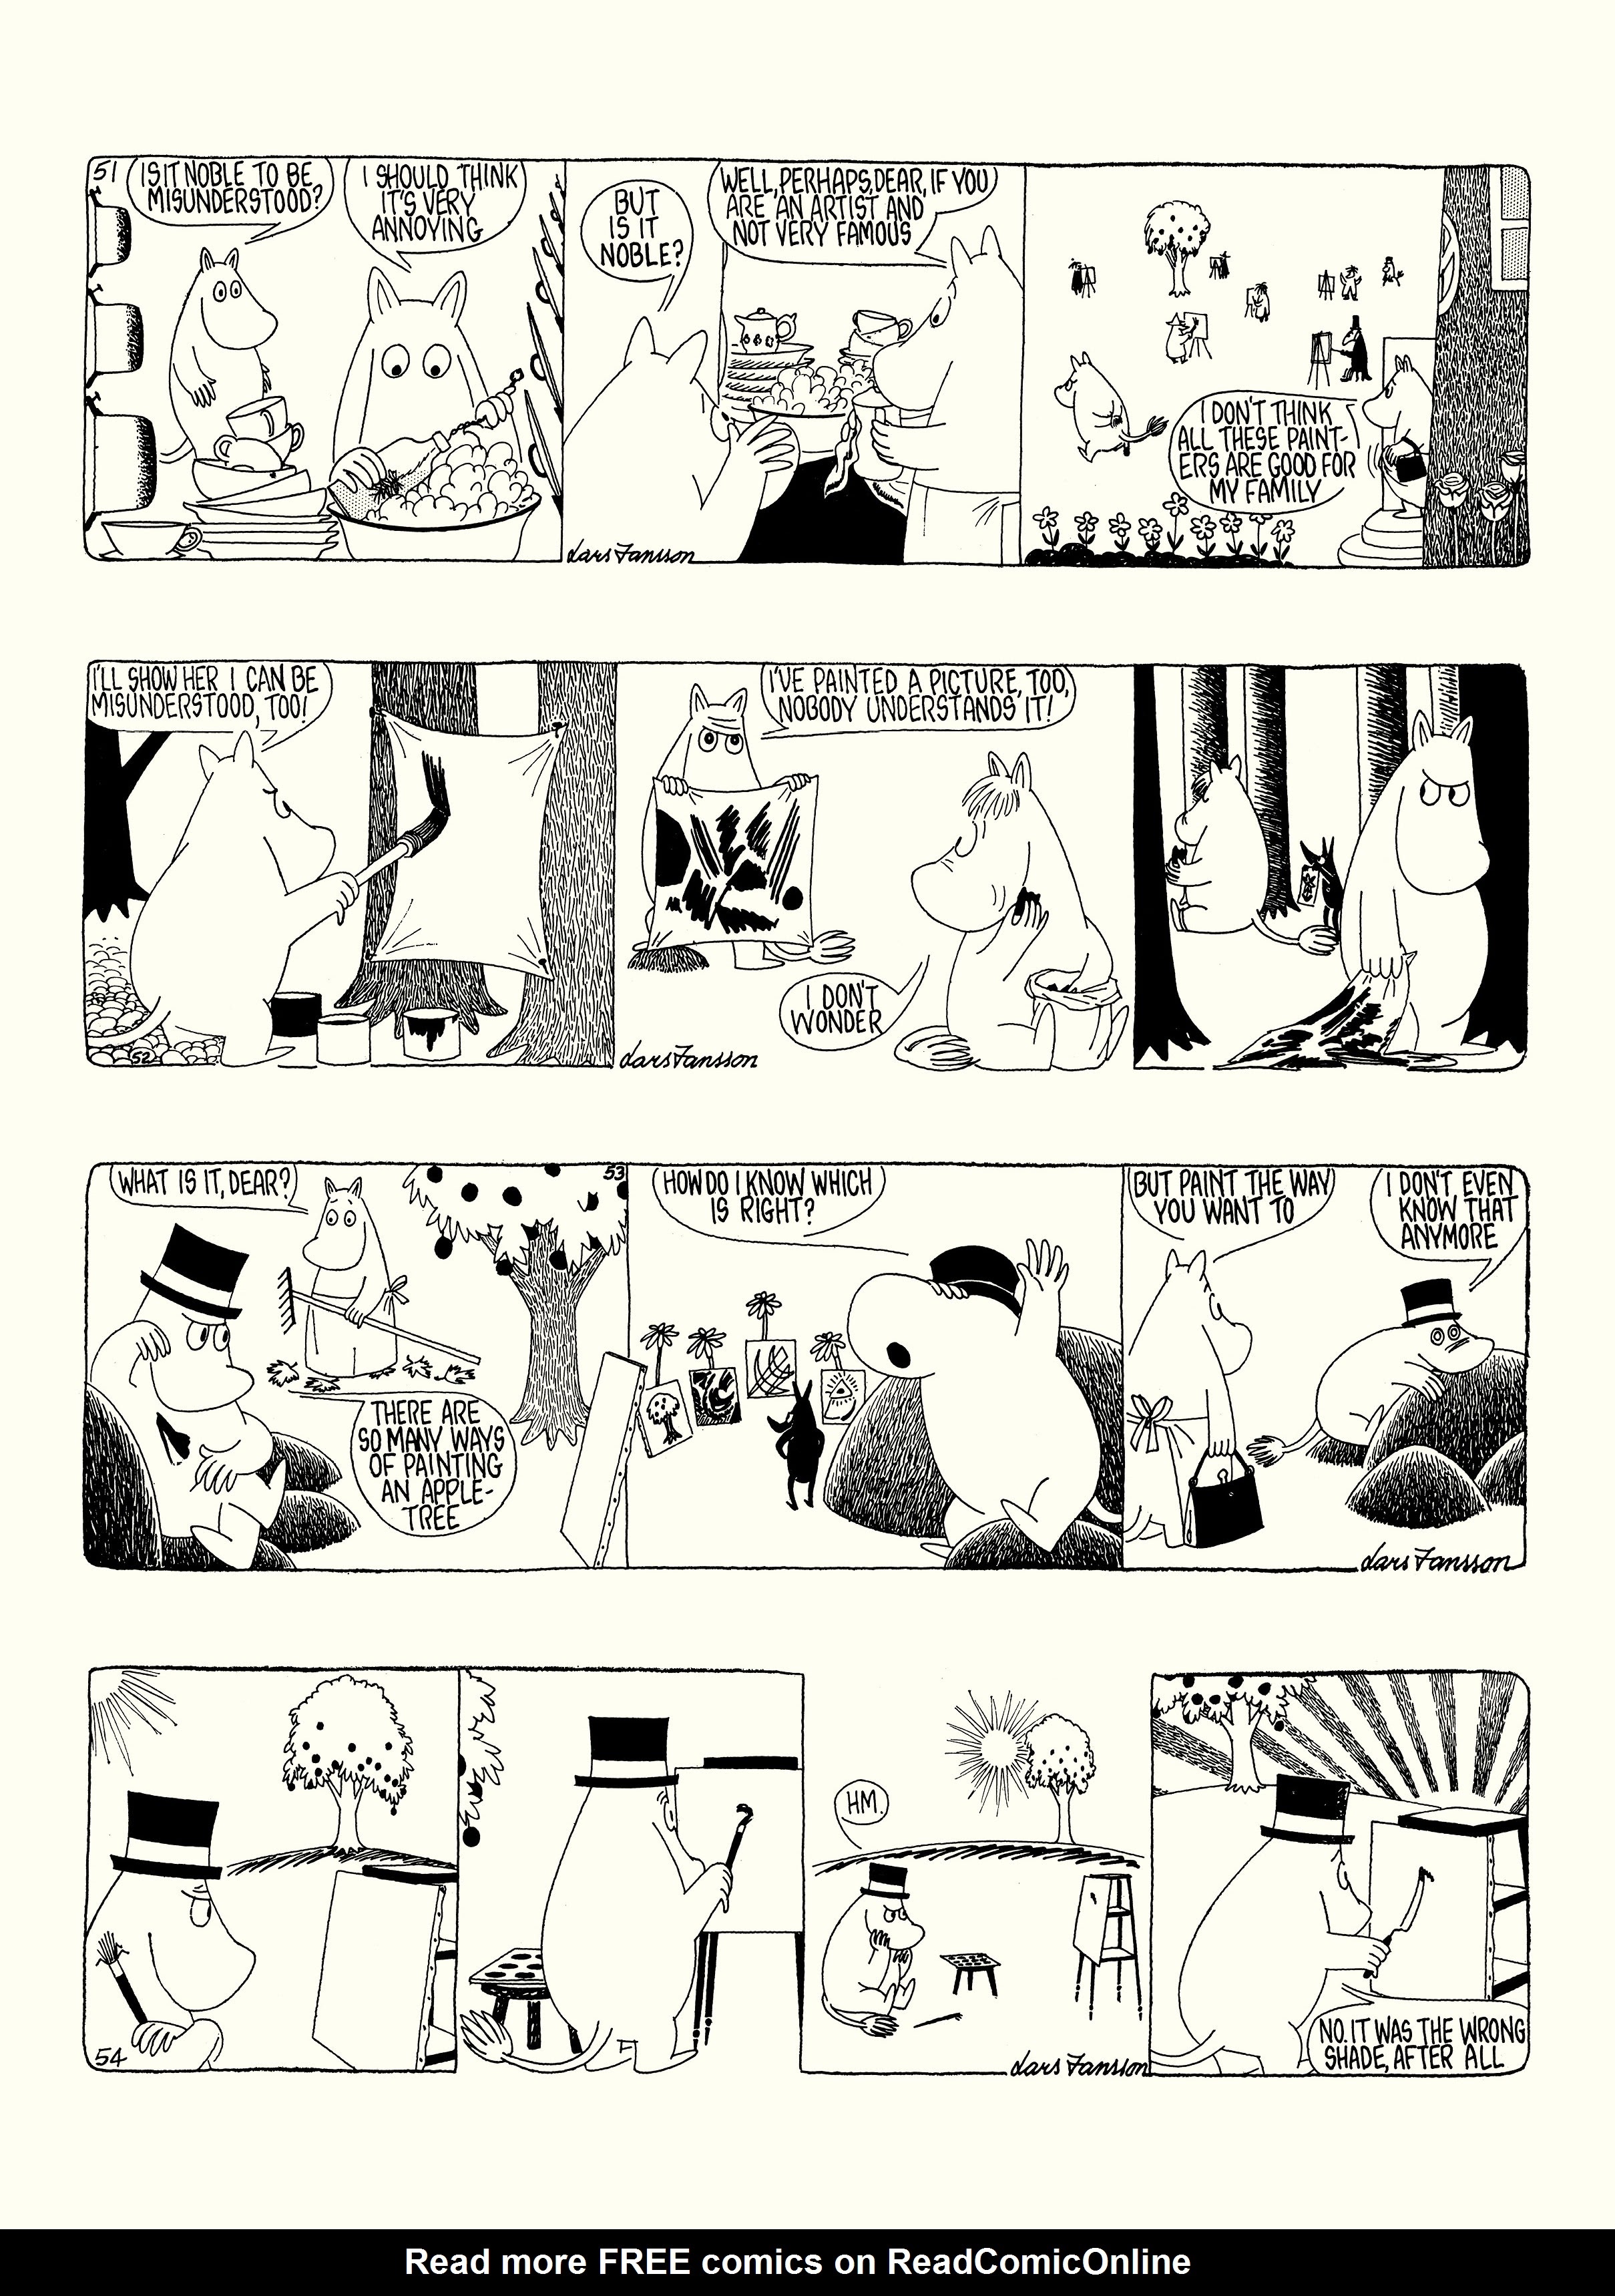 Read online Moomin: The Complete Lars Jansson Comic Strip comic -  Issue # TPB 8 - 40